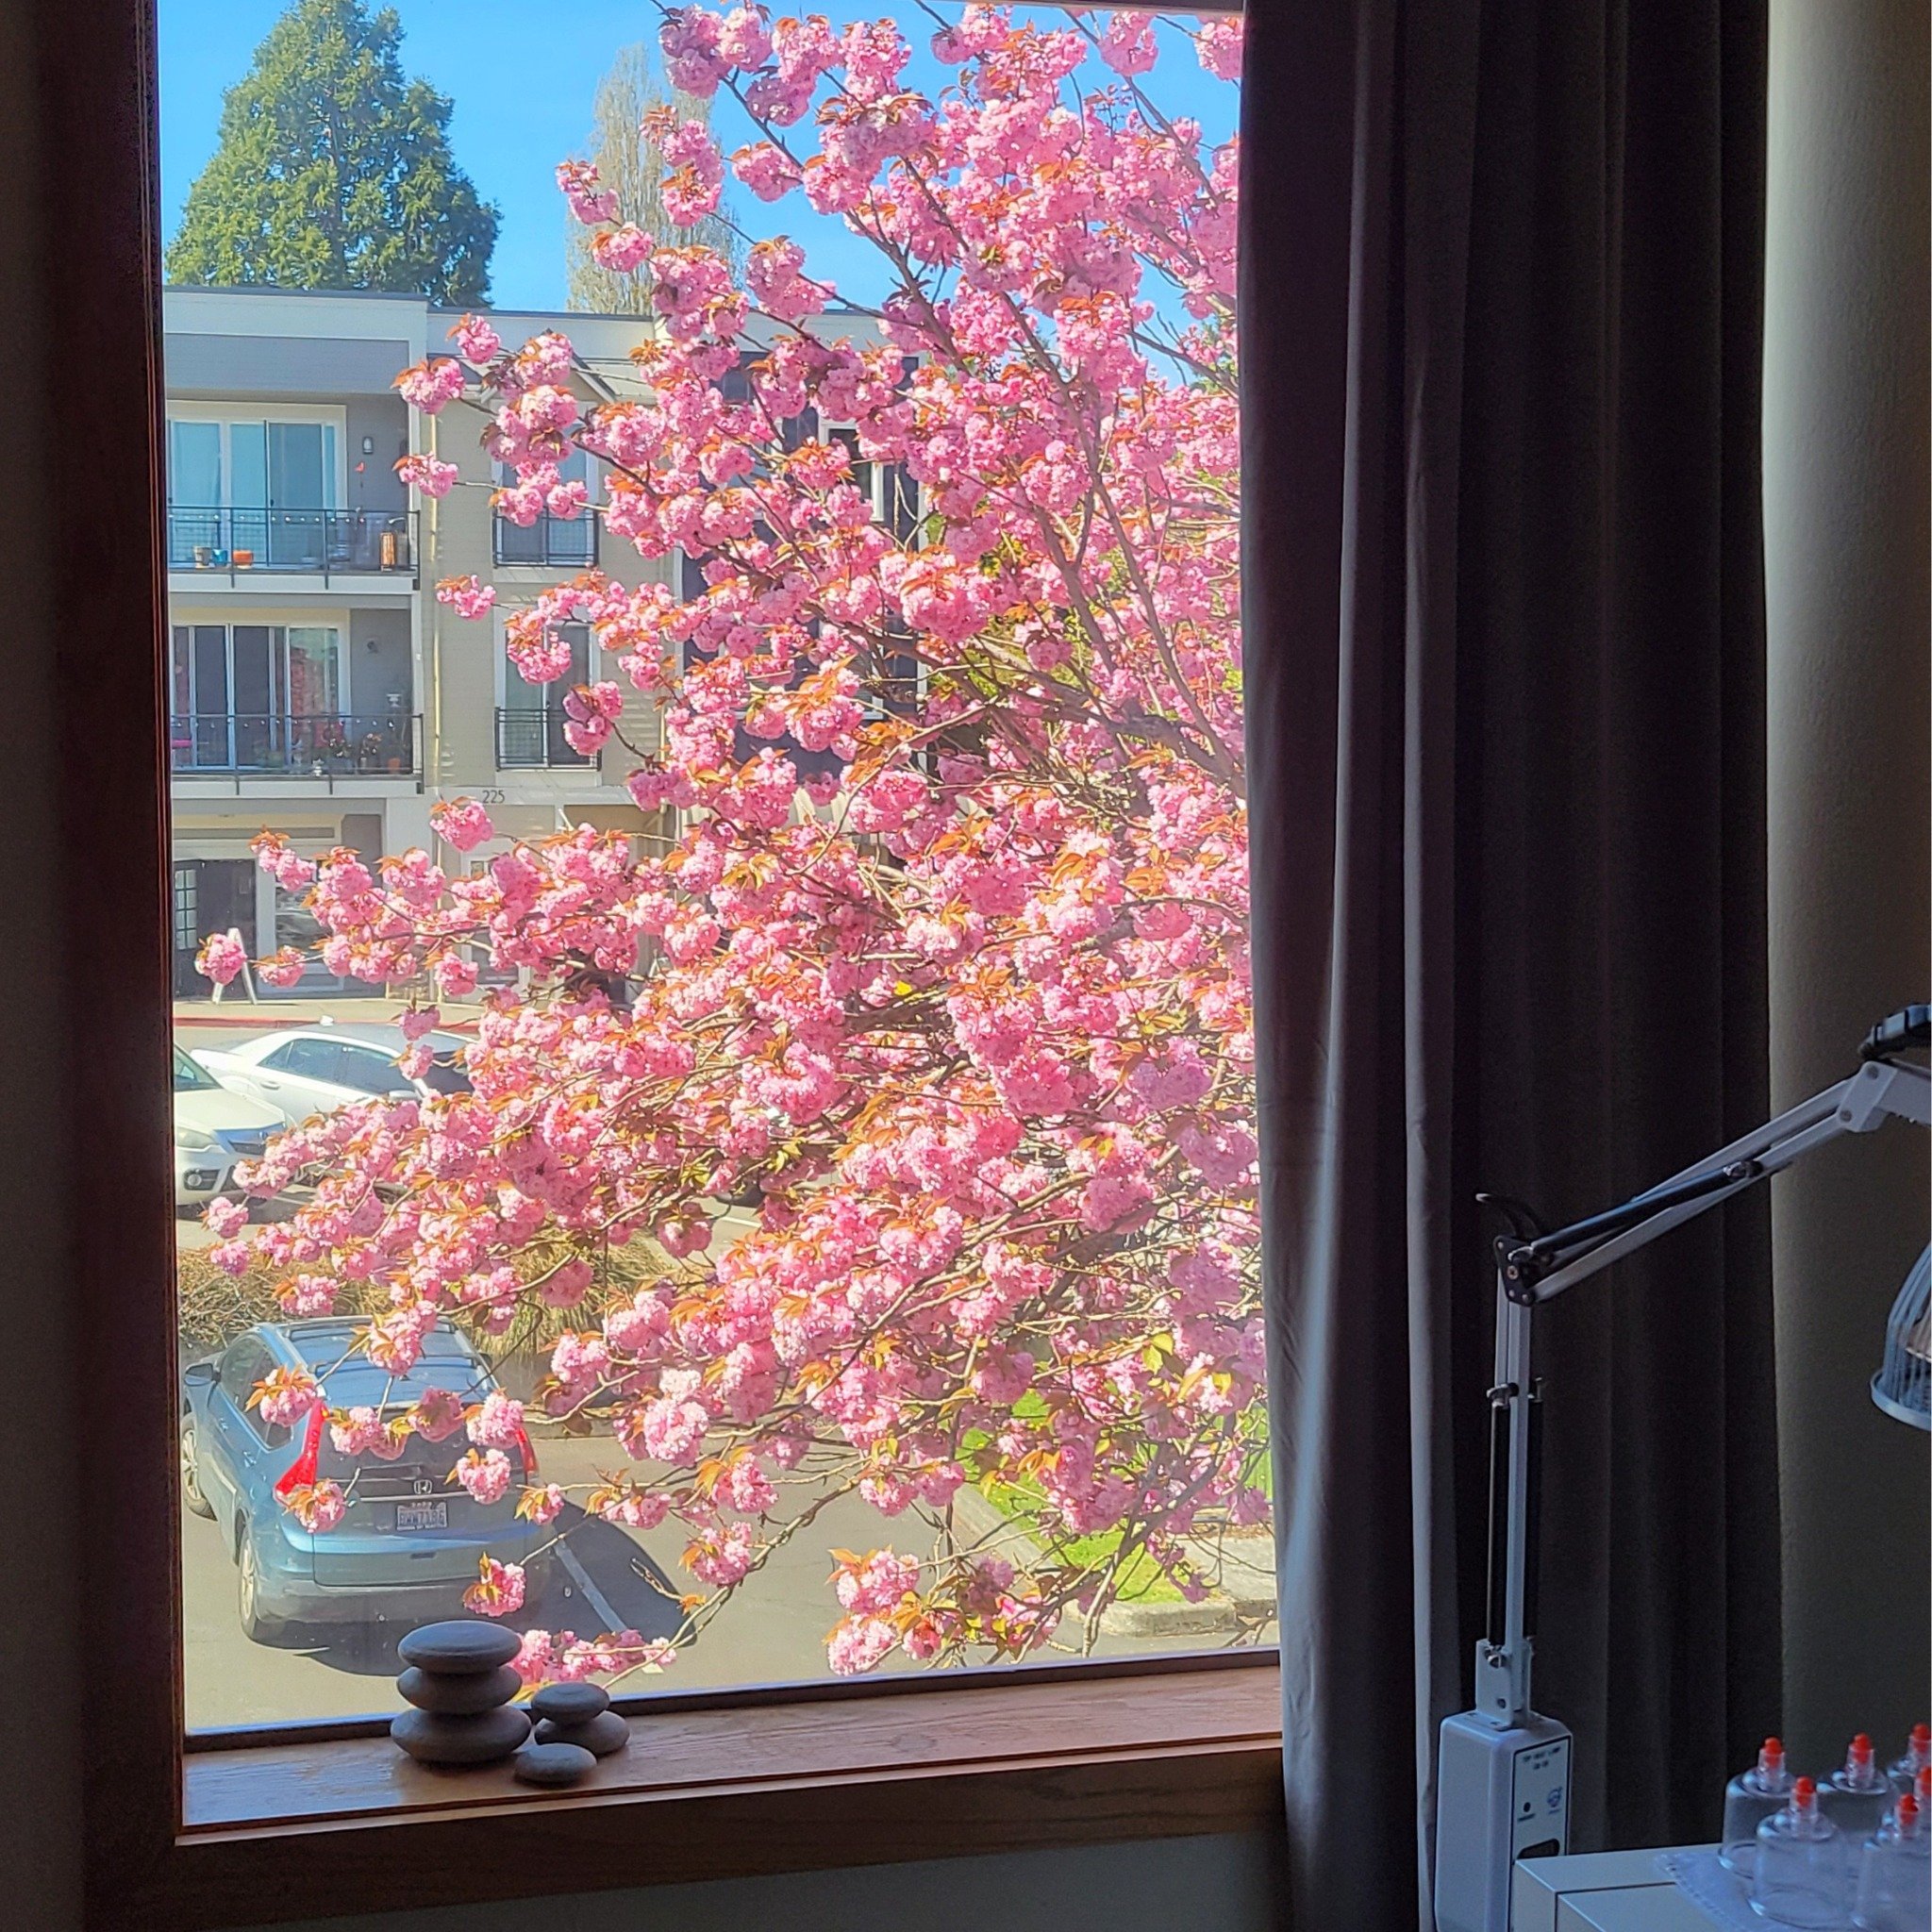 ✨ Last weekend, this beautiful surprise greeted me when I opened the door to my acupuncture room. ✨

As usual, I was rushing to get there, so I didn't notice the tree when I was outside. Opening the door to my room took my breath away. The colors wer